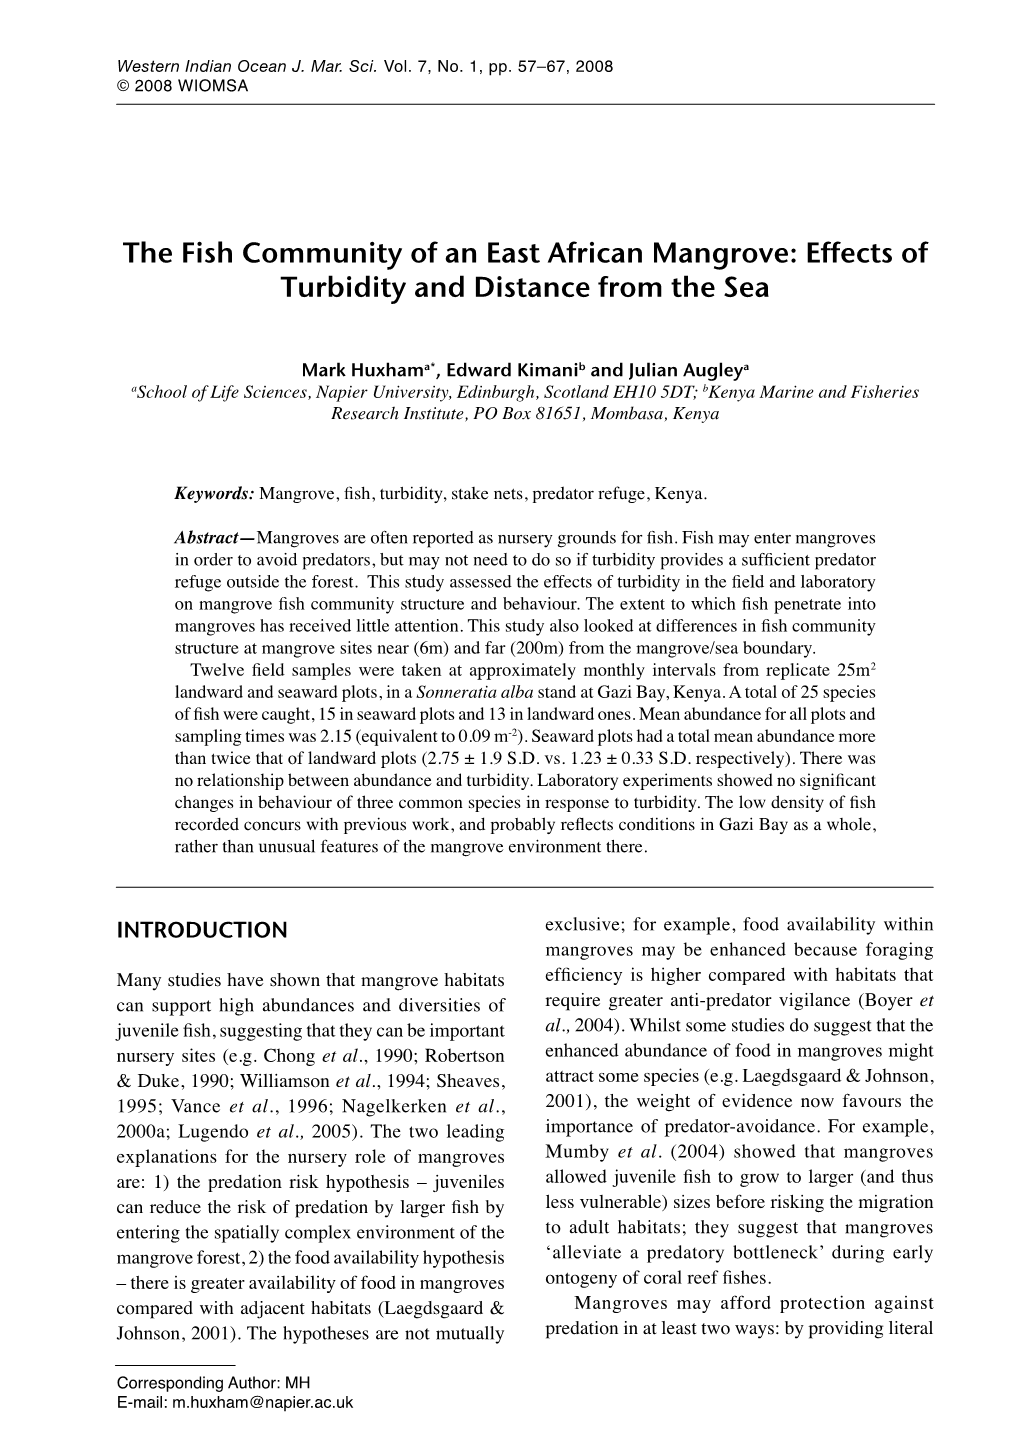 The Fish Community of an East African Mangrove: Effects of Turbidity and Distance from the Sea